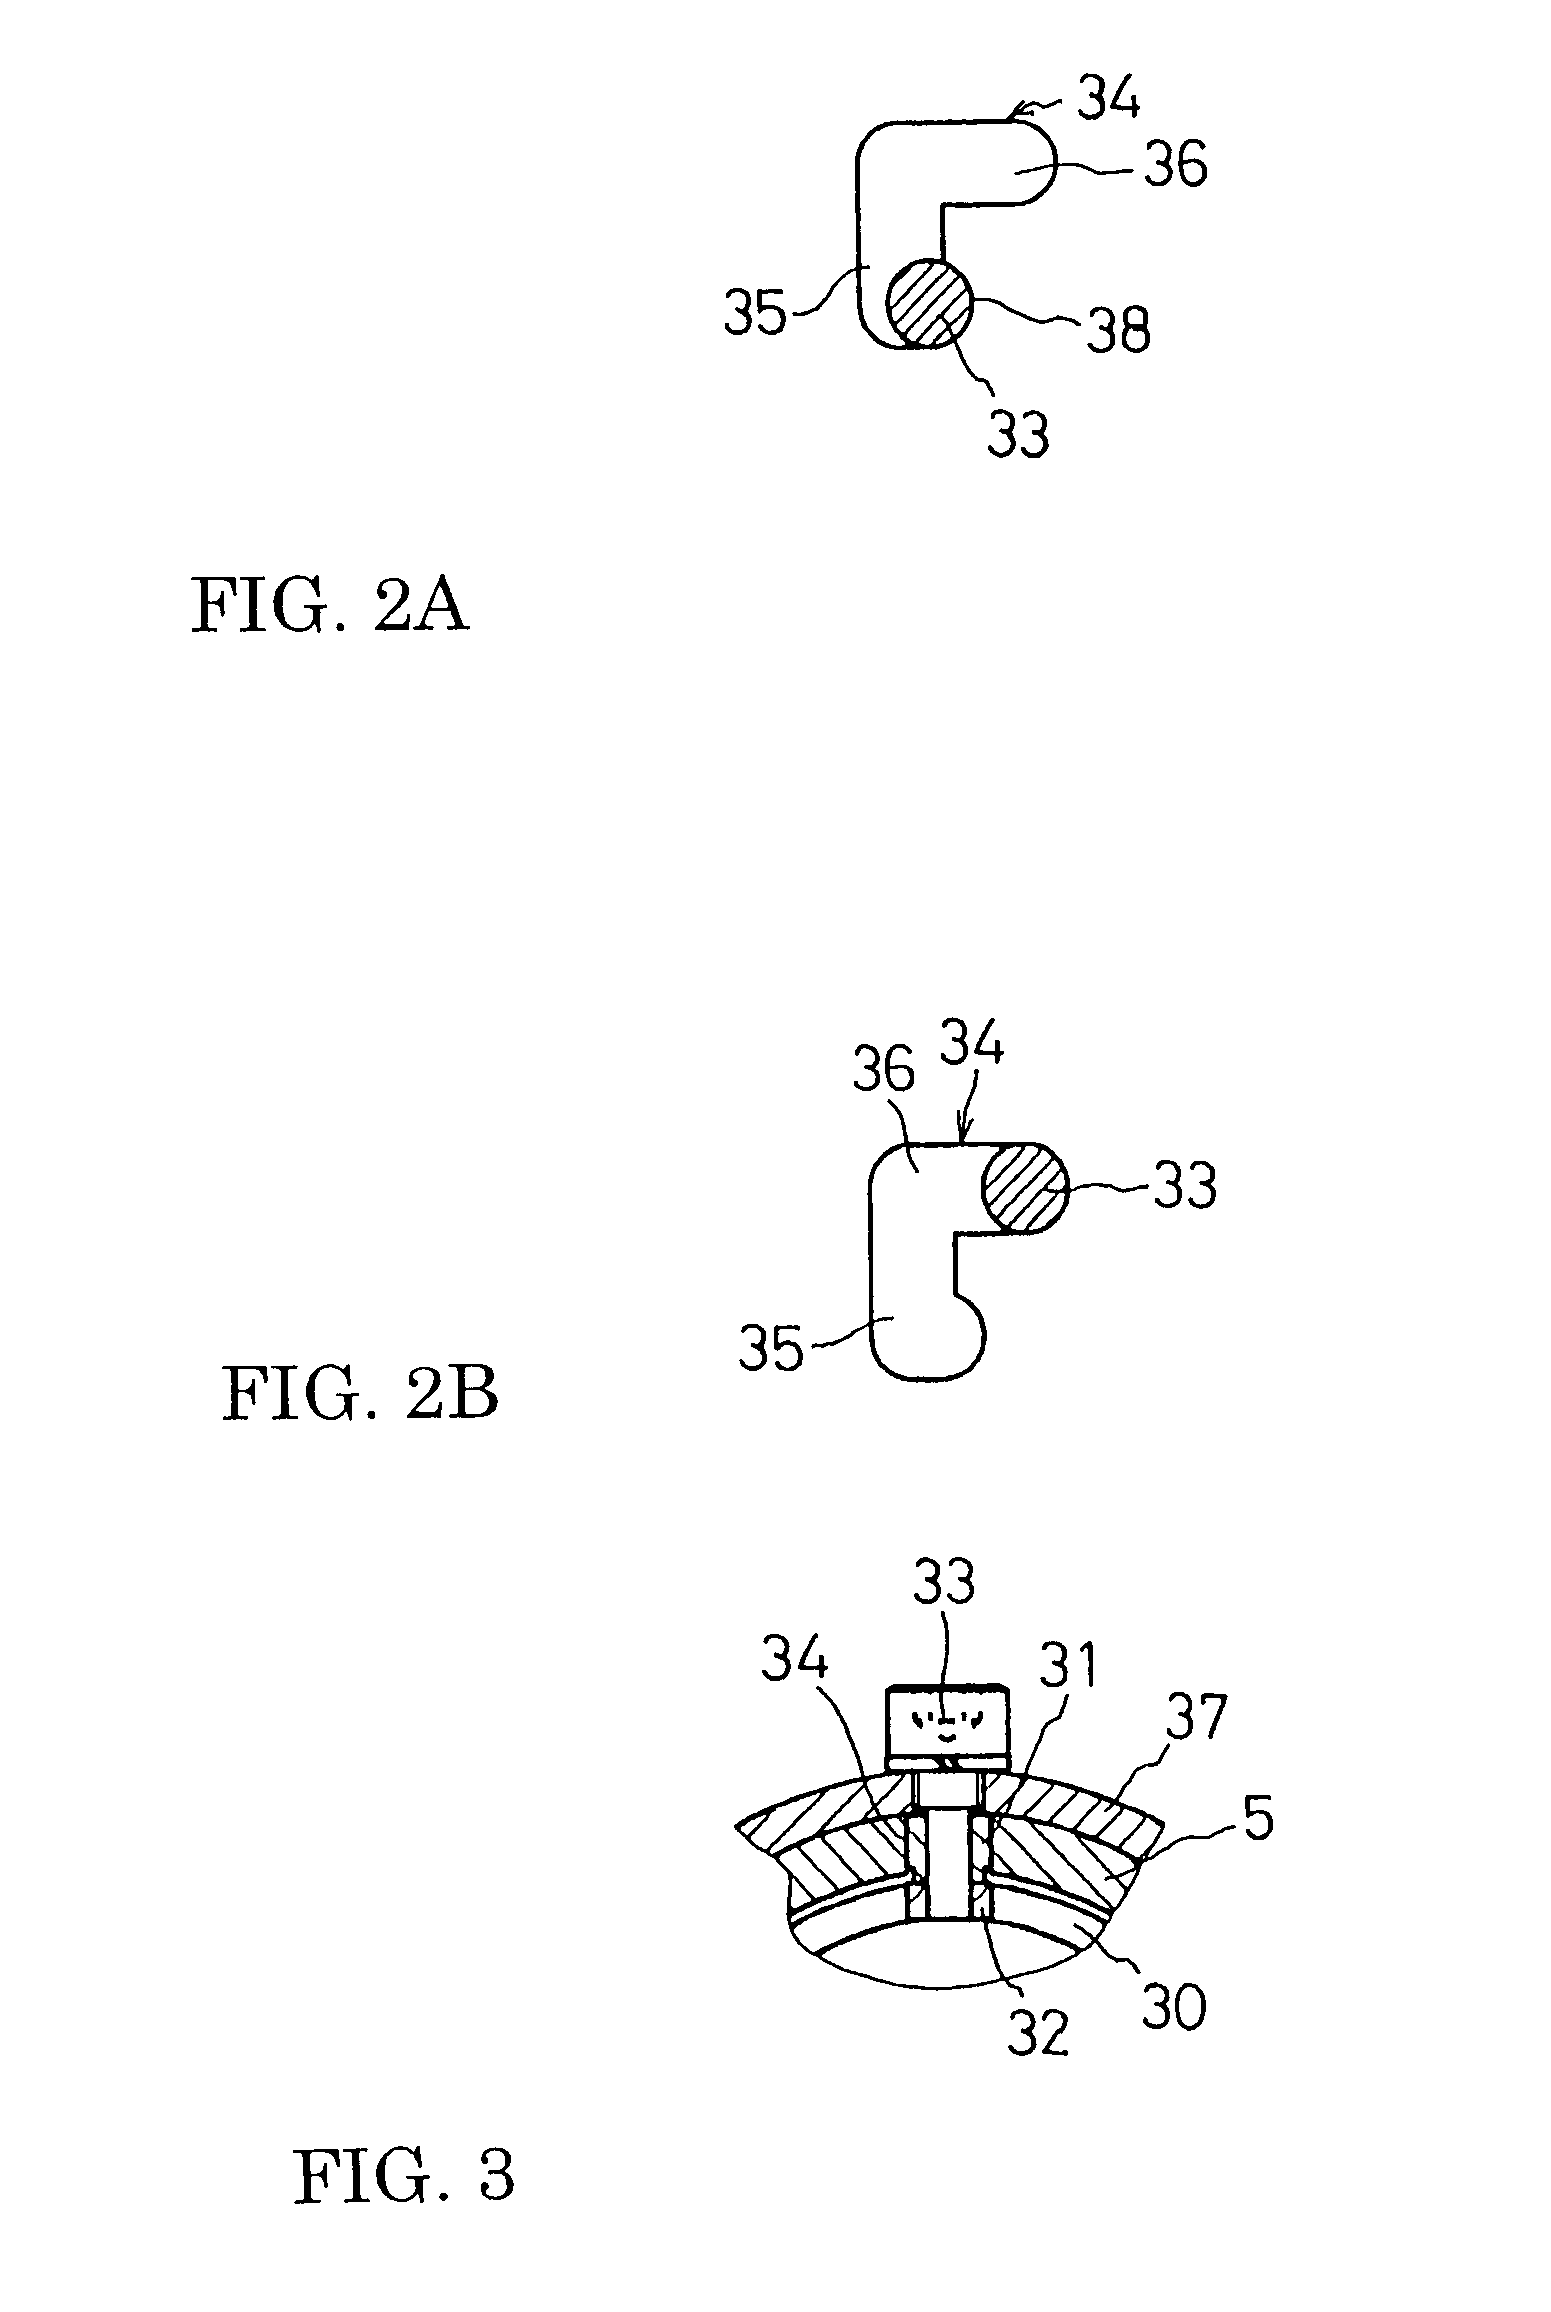 Impact driver having an external mechanism which operation mode can be selectively switched between impact and drill modes